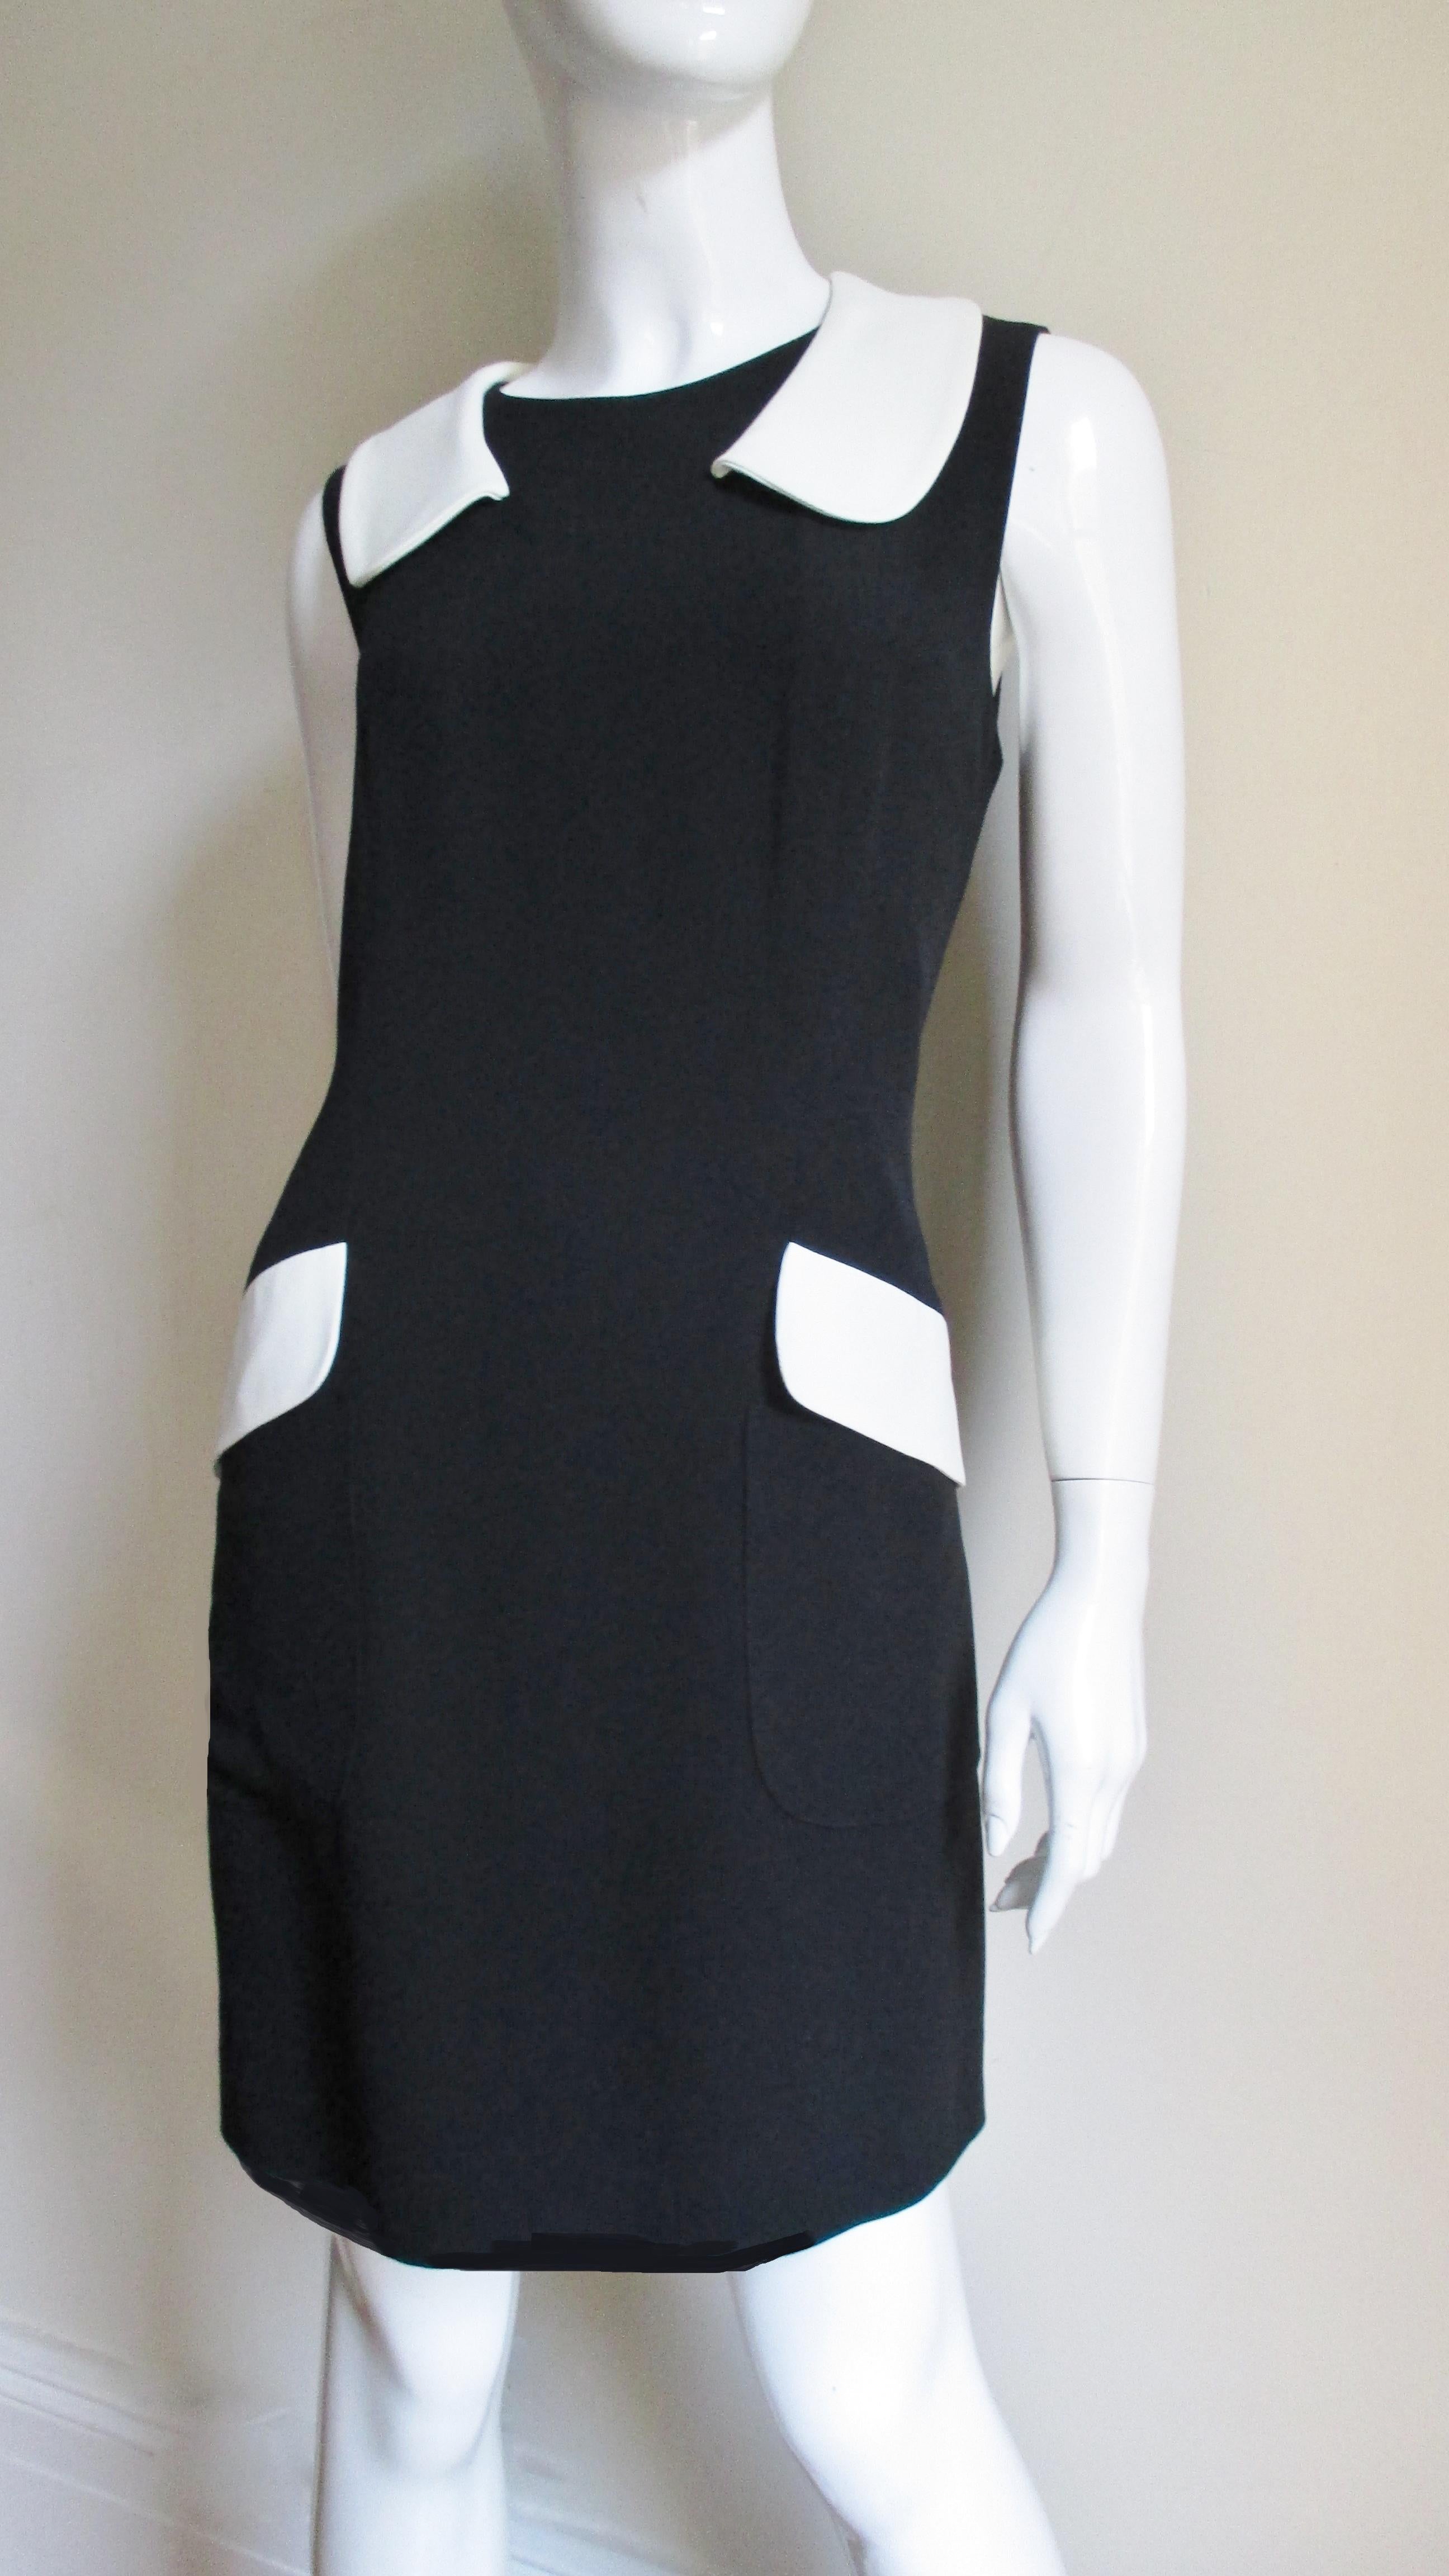 A great black and off white dress from Moschino. The sleeveless semi fitted dress has an off white peter pan collar and large front patch pockets with off white flaps. It is fully lined and has a back zipper.
Fits size Medium. Marked Italian size